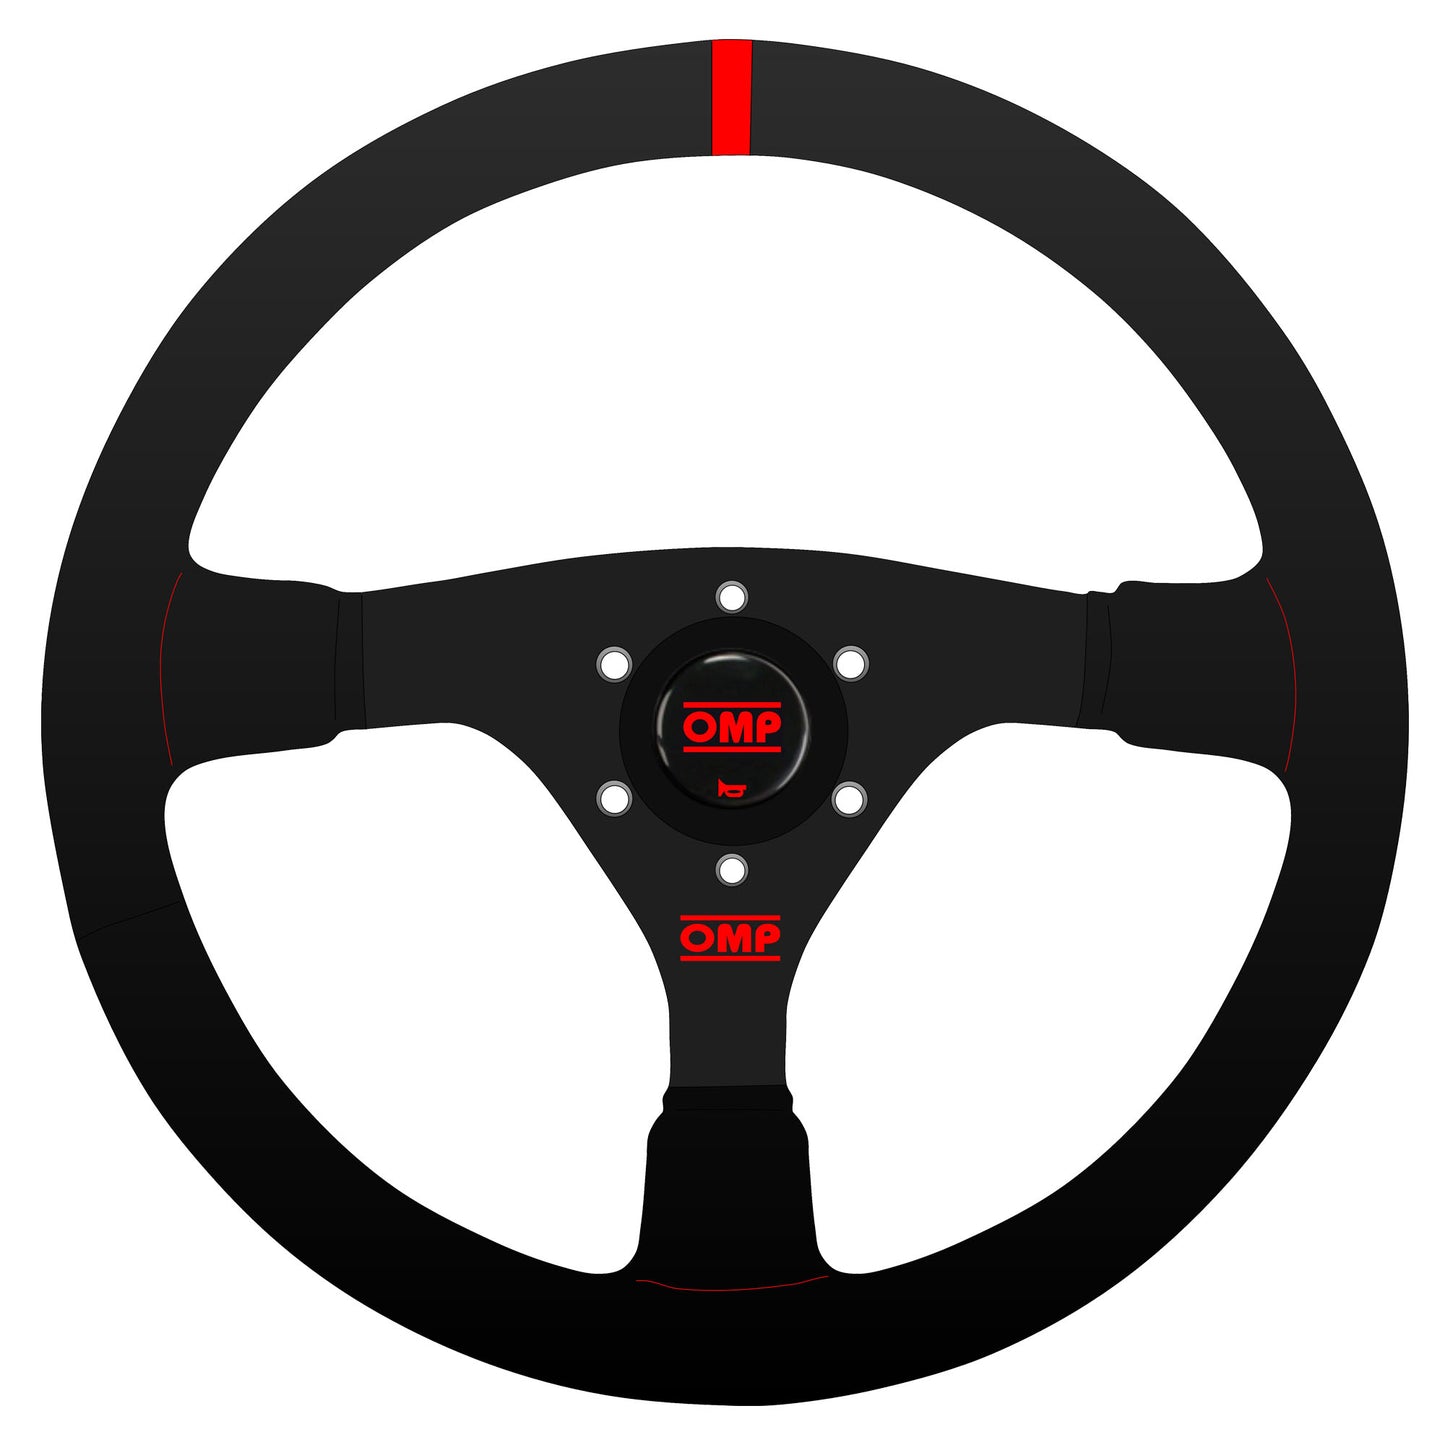 SPECIAL EDITION OMP WRC STEERING WHEEL MID-DEPTH 350mm SUEDE LEATHER RED/BLACK